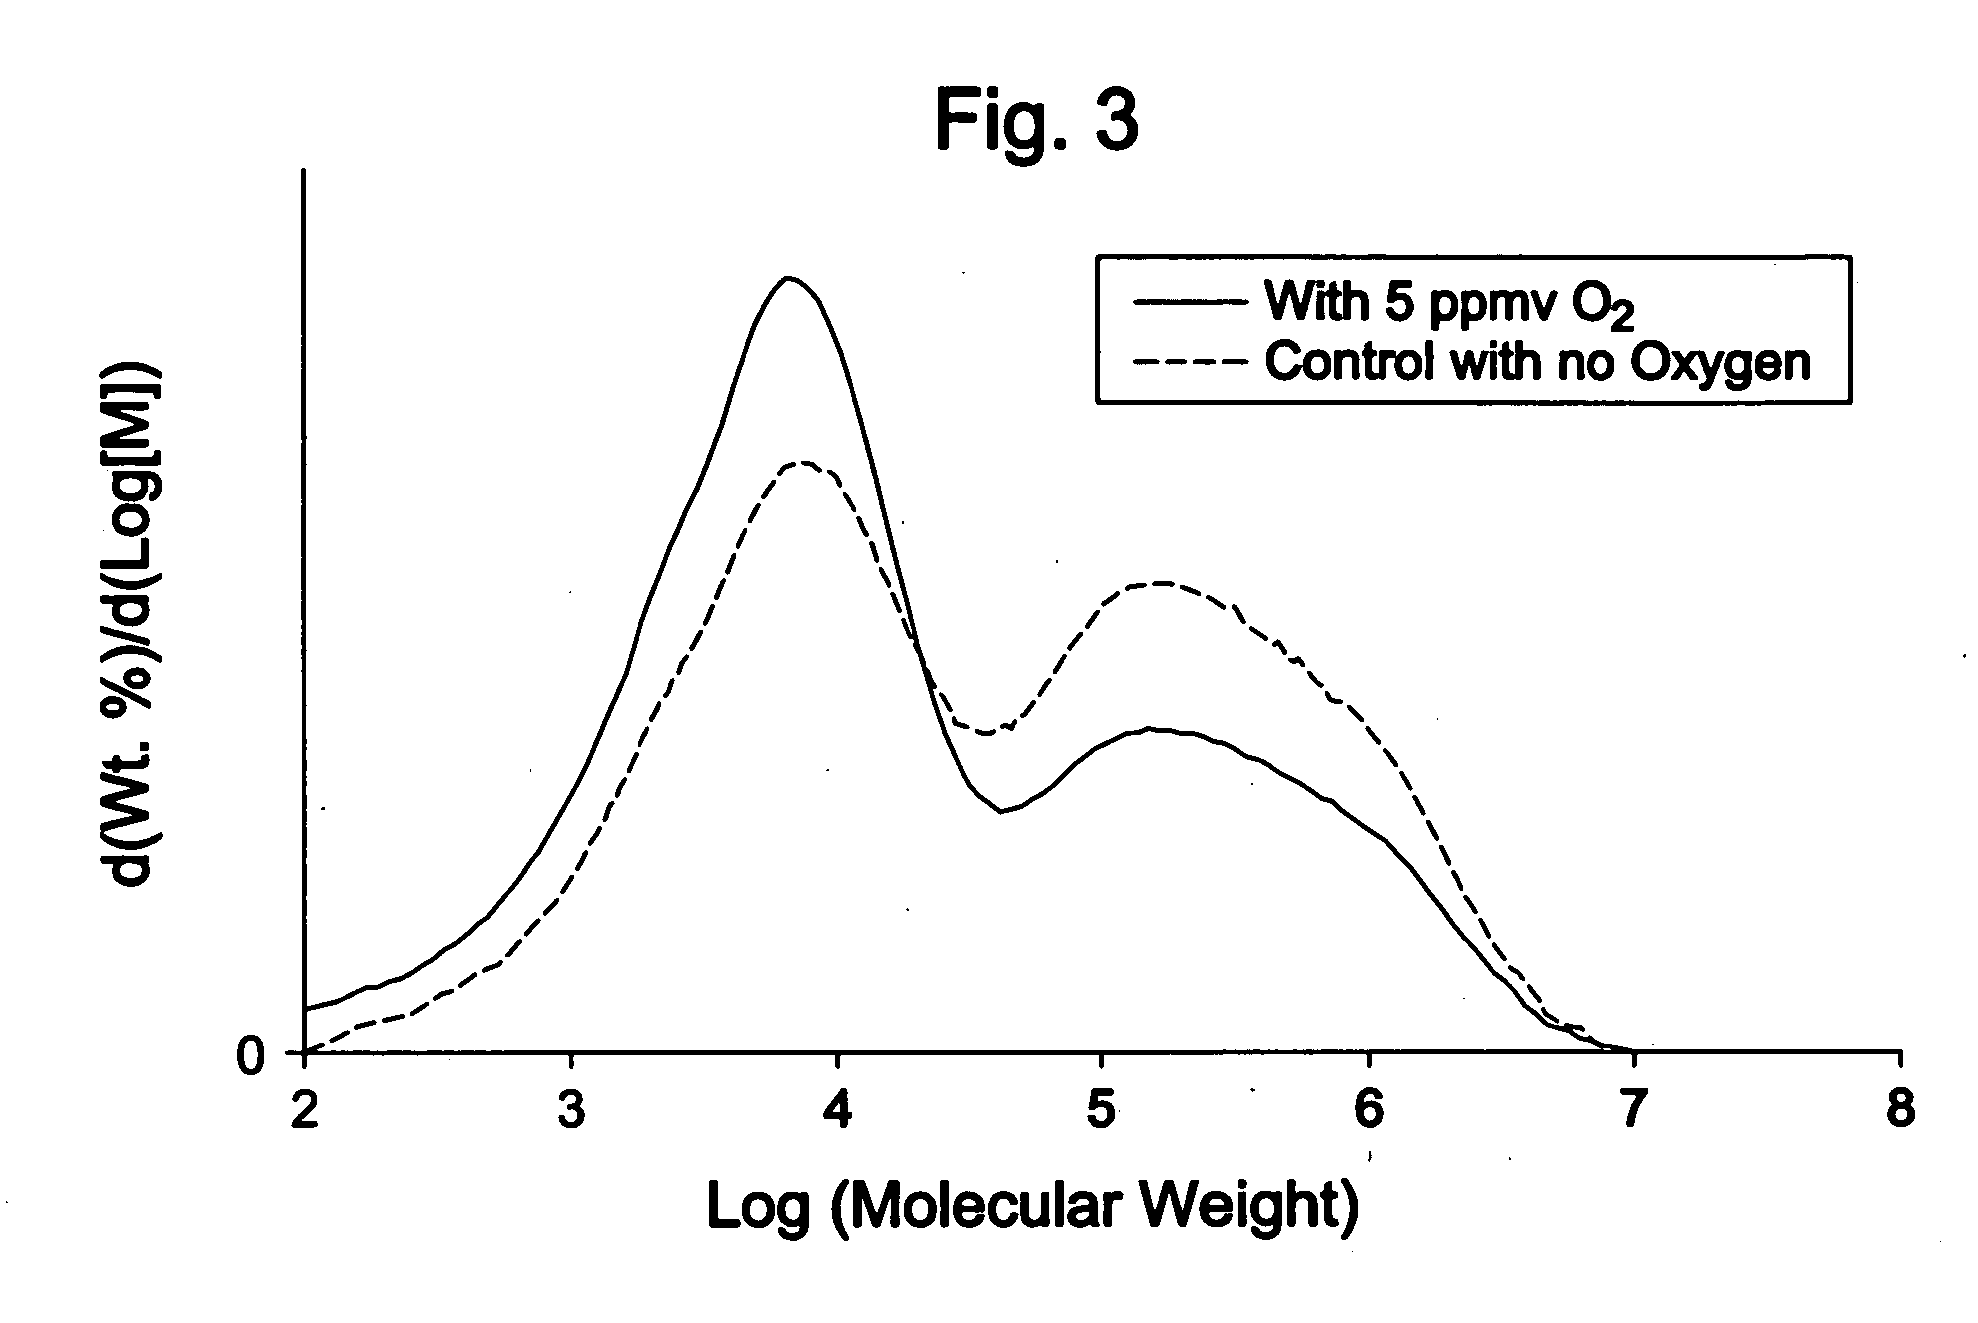 Polymerization process and control of polymer composition properties